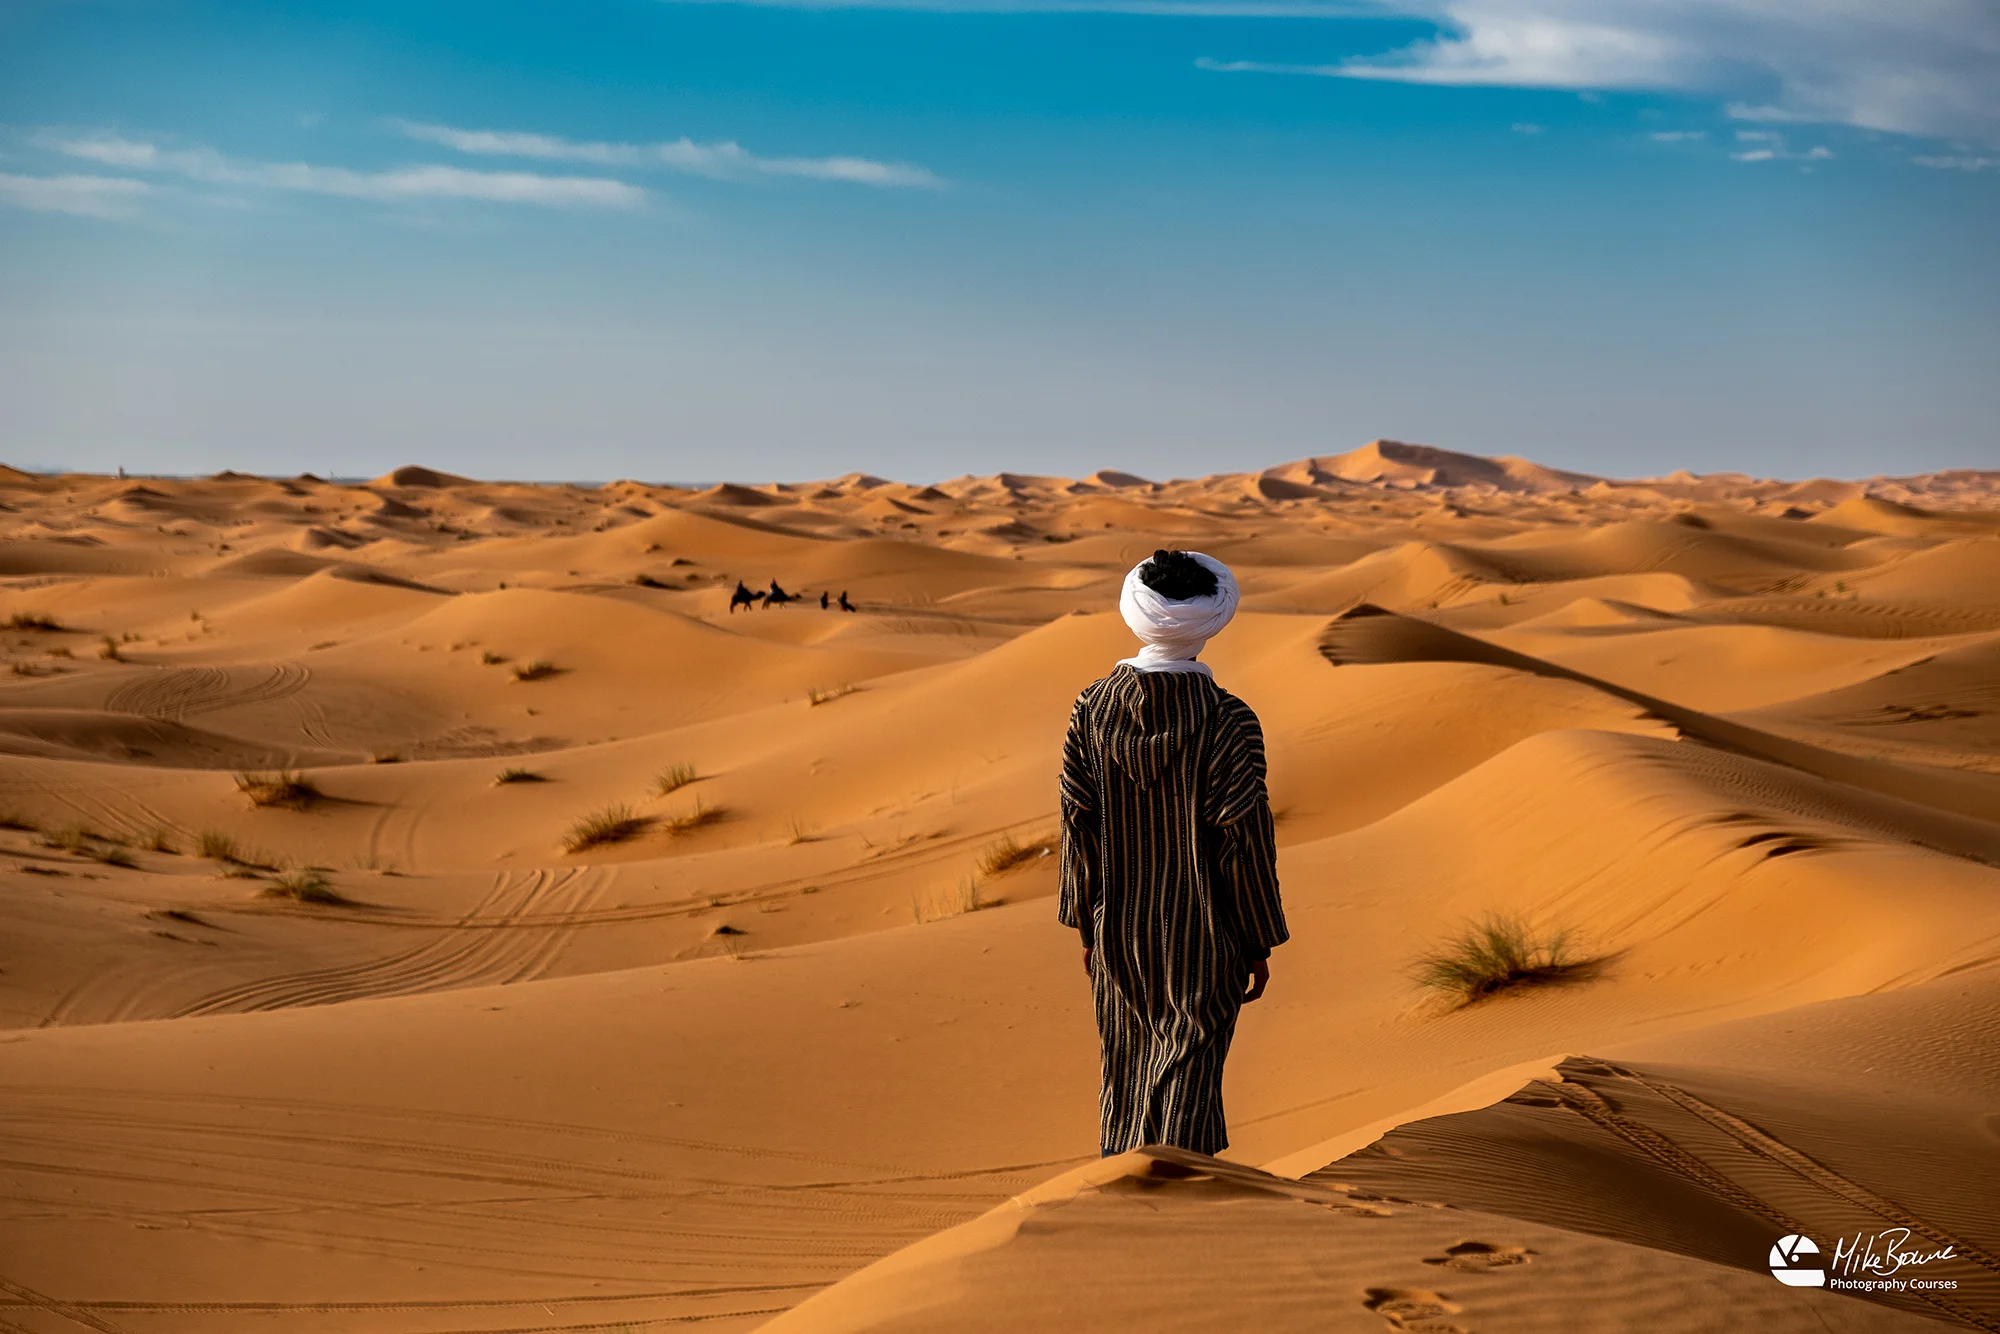 Moroccan man wearing striped djellaba and white head scarf looking out over sand dunes in Sahara Desert at Merzouga in Morocco